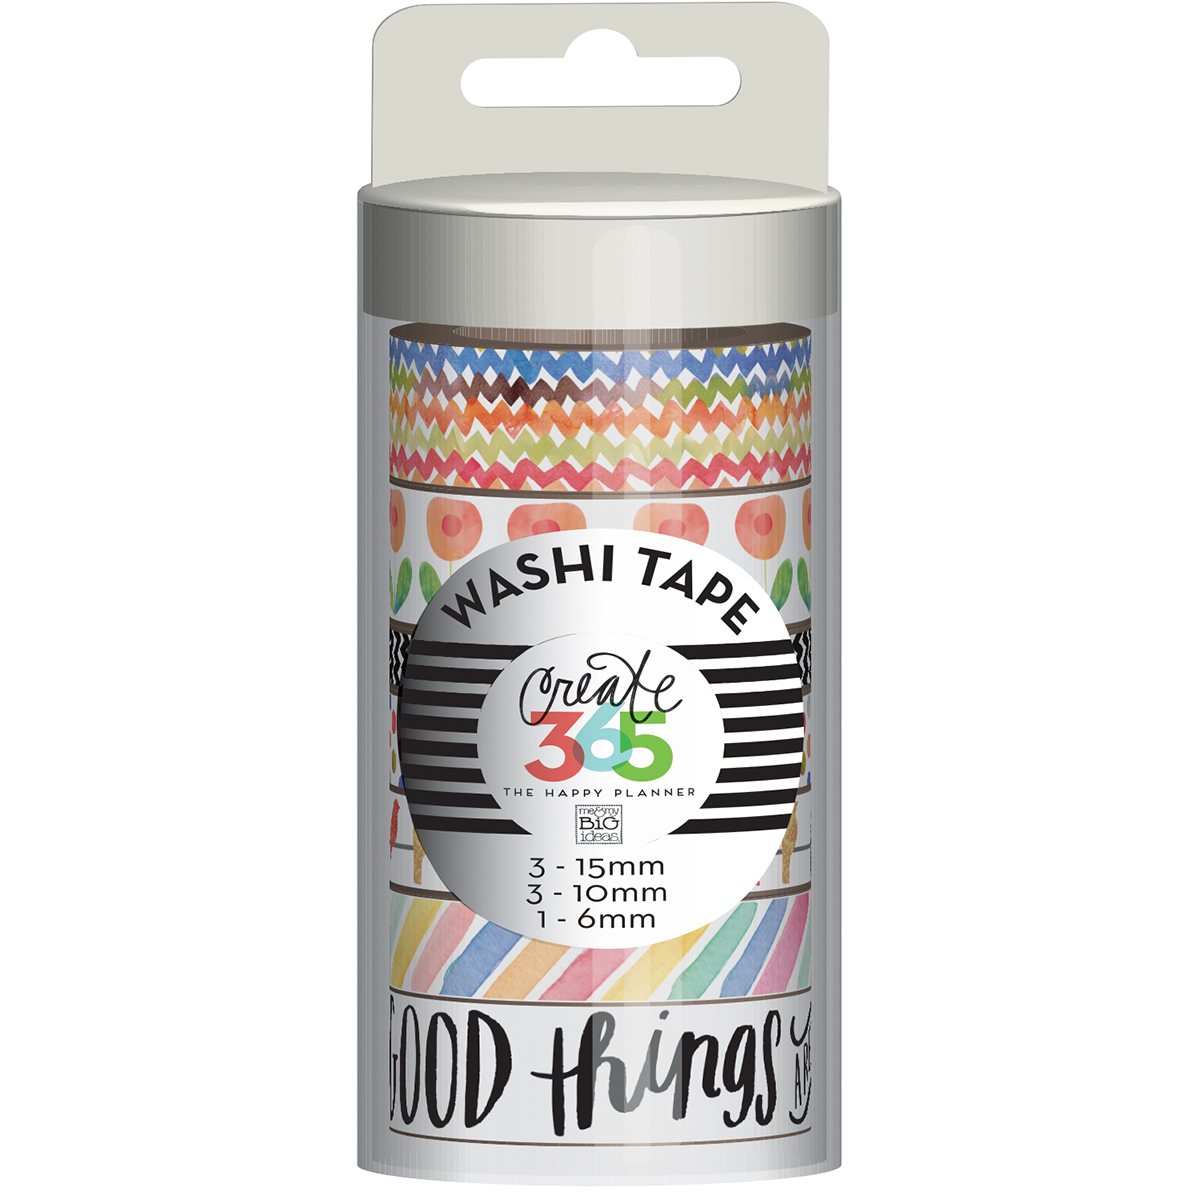 Me and My Big Ideas Create 365 Collection Washi Tape Good Things - $28.35